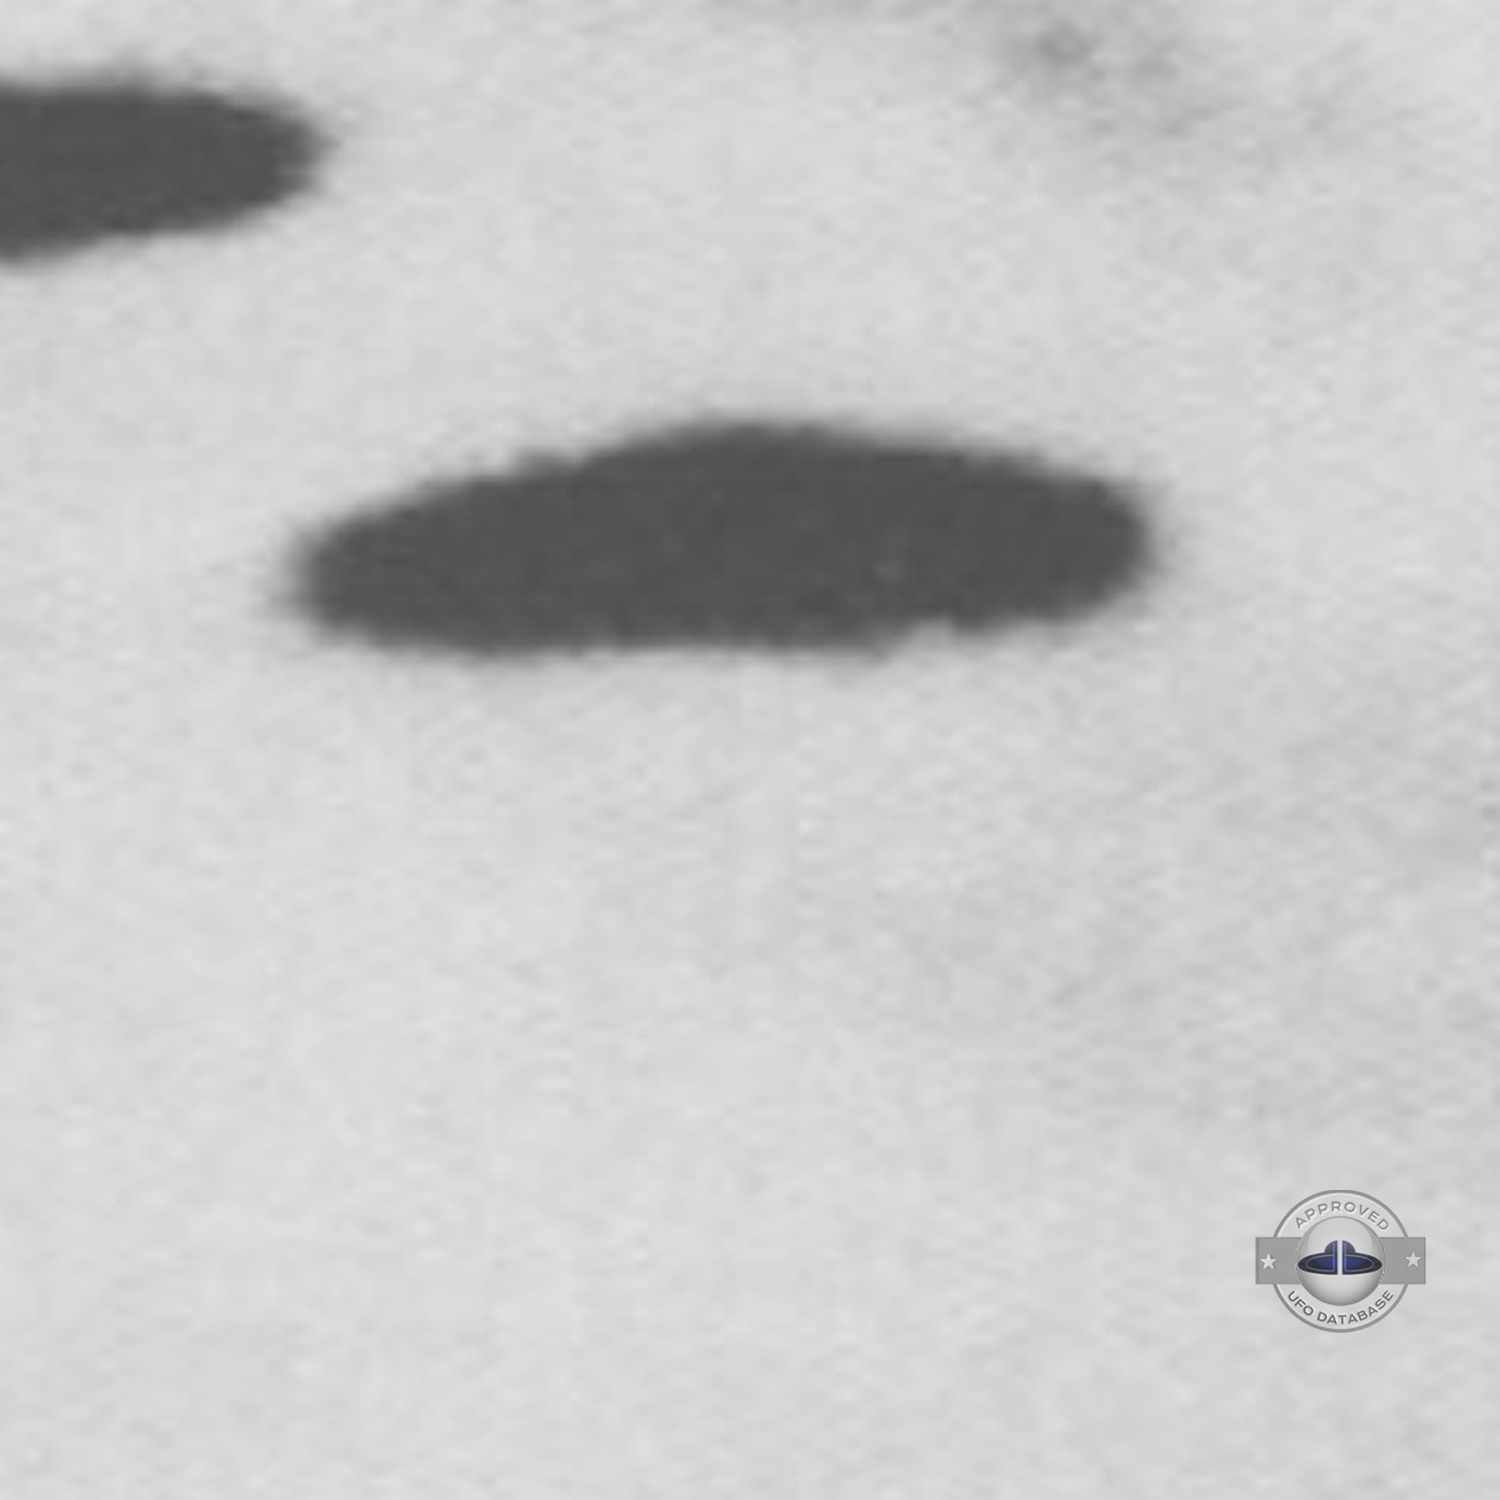 3 dark saucer shape UFOs near church in cathedral square of Sicuani UFO Picture #131-6